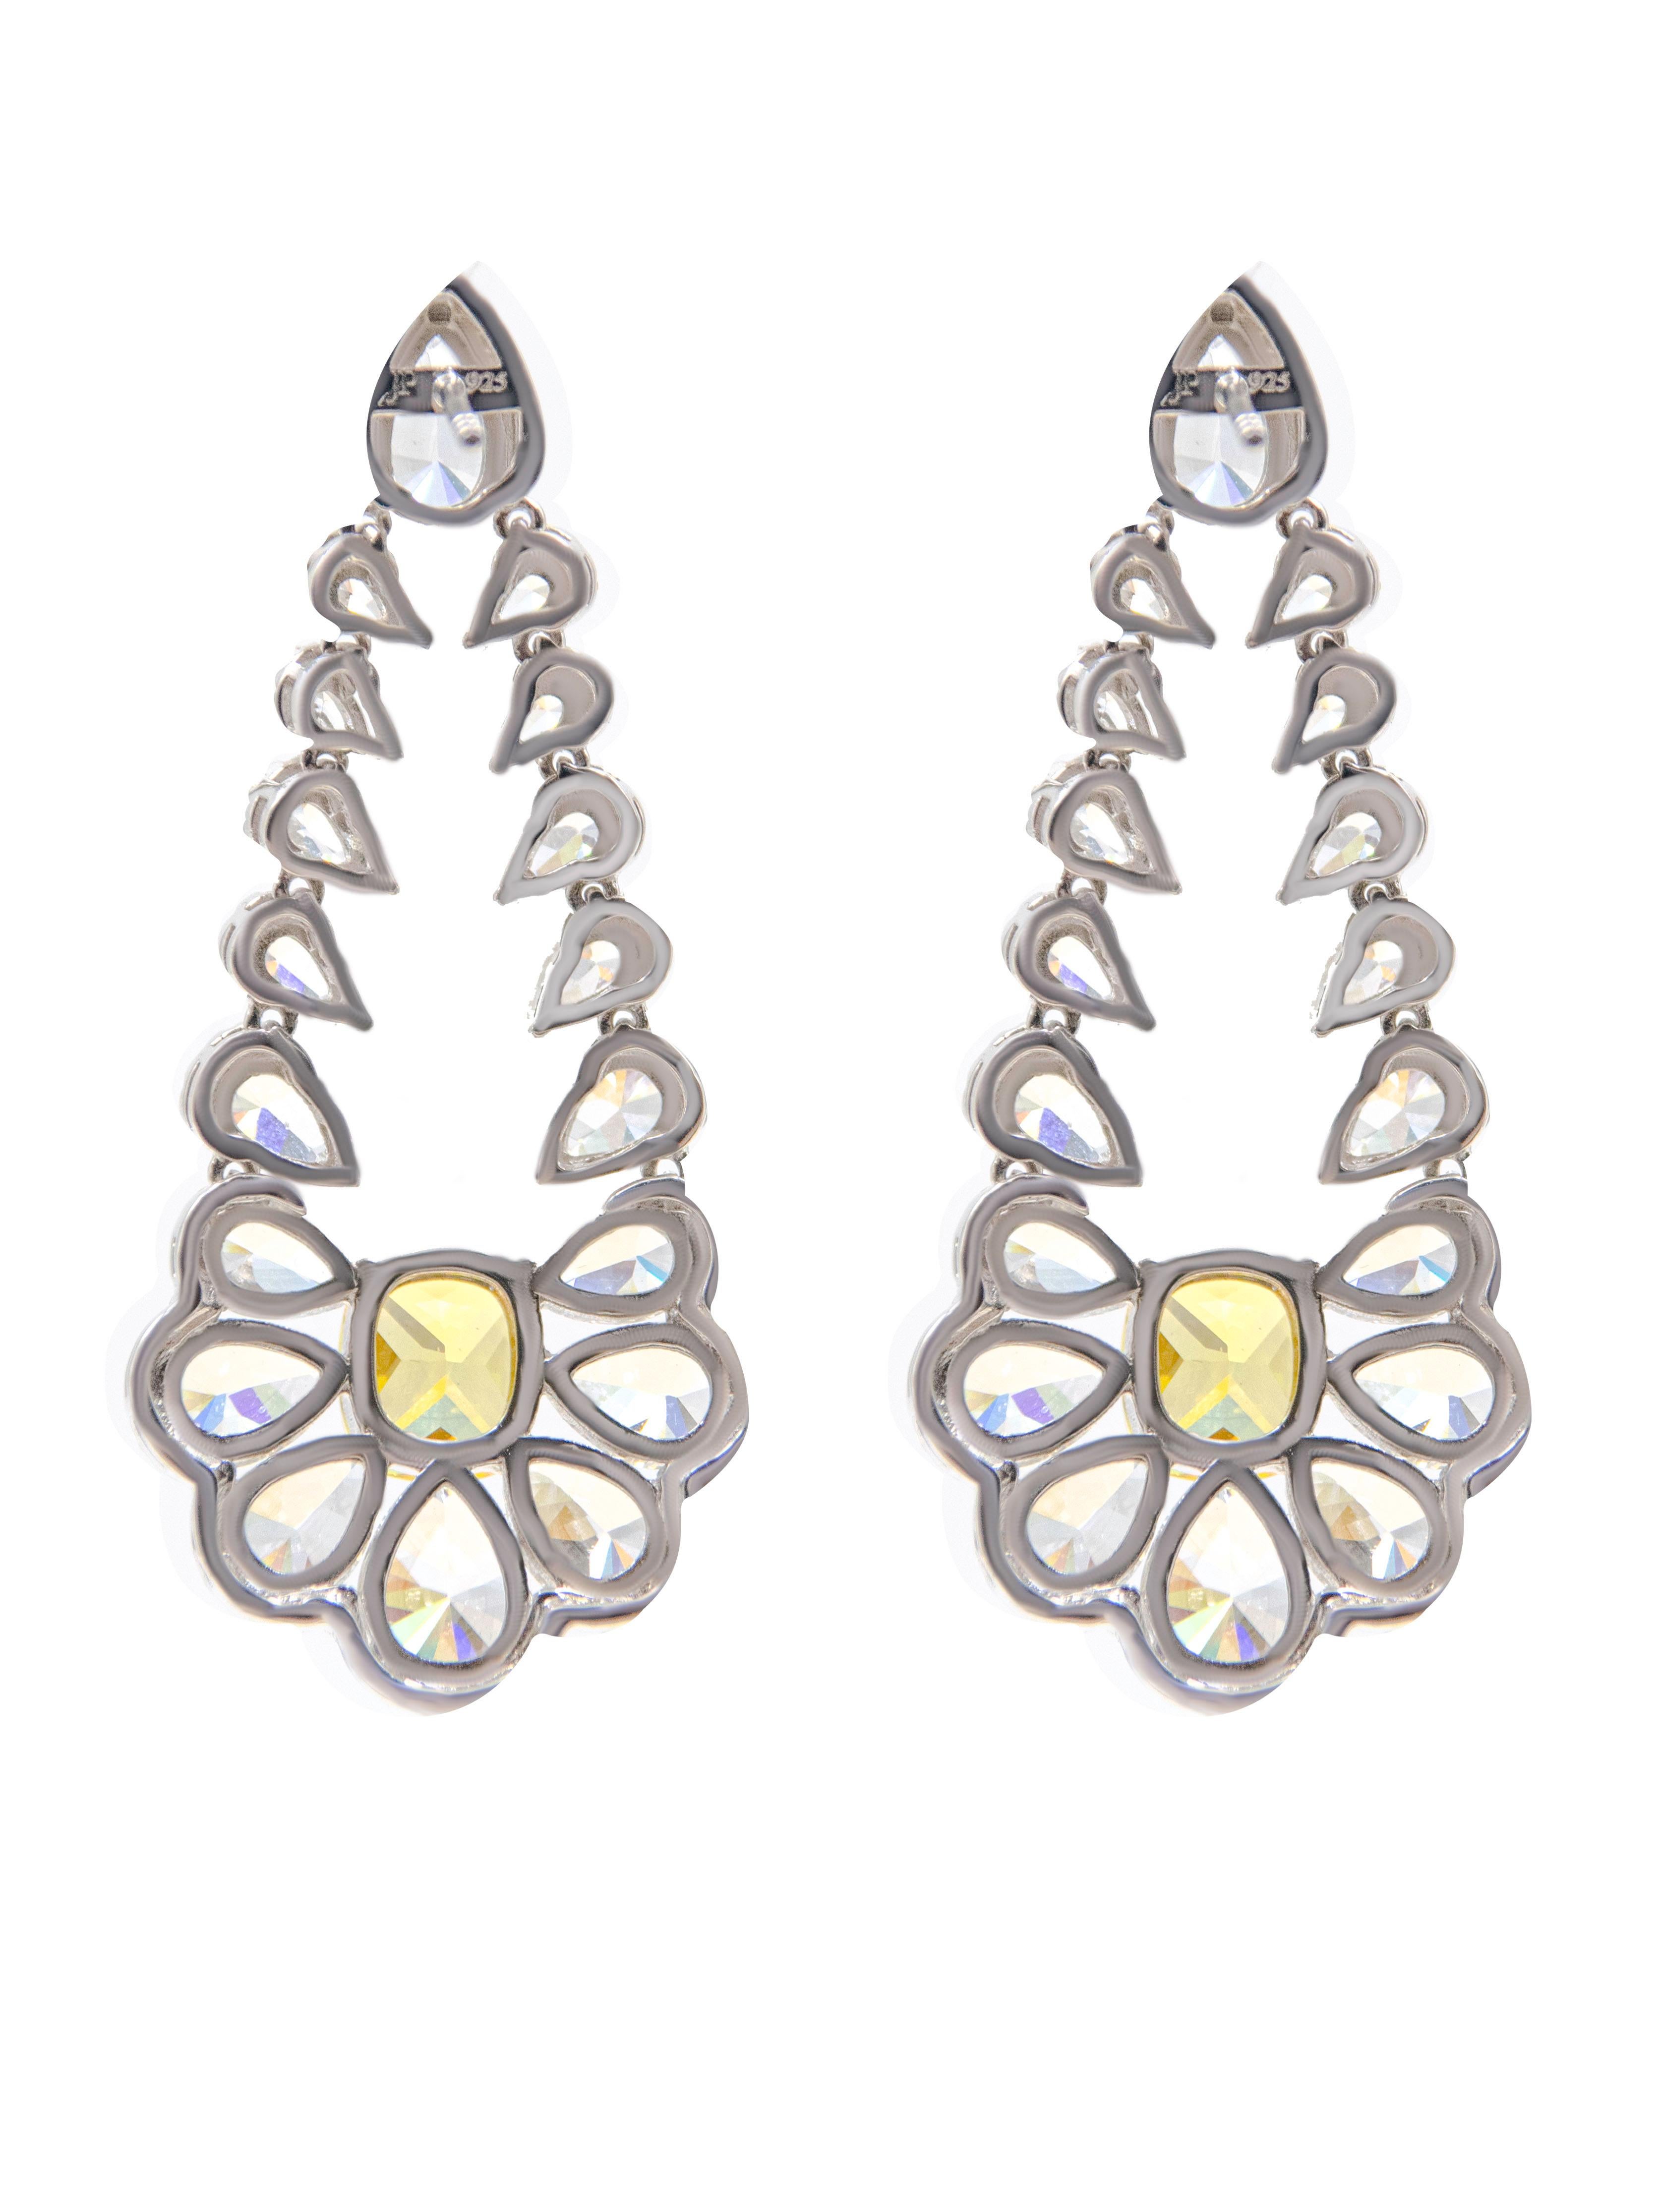 The Yellow Picard Earrings are a halo of round canary yellow stones. Carefully handset in Rhodium plated, 925 Sterling Silver, the pair make for a distinctive style statement. Add matching necklace to complete the look.

925 Sterling Silver with